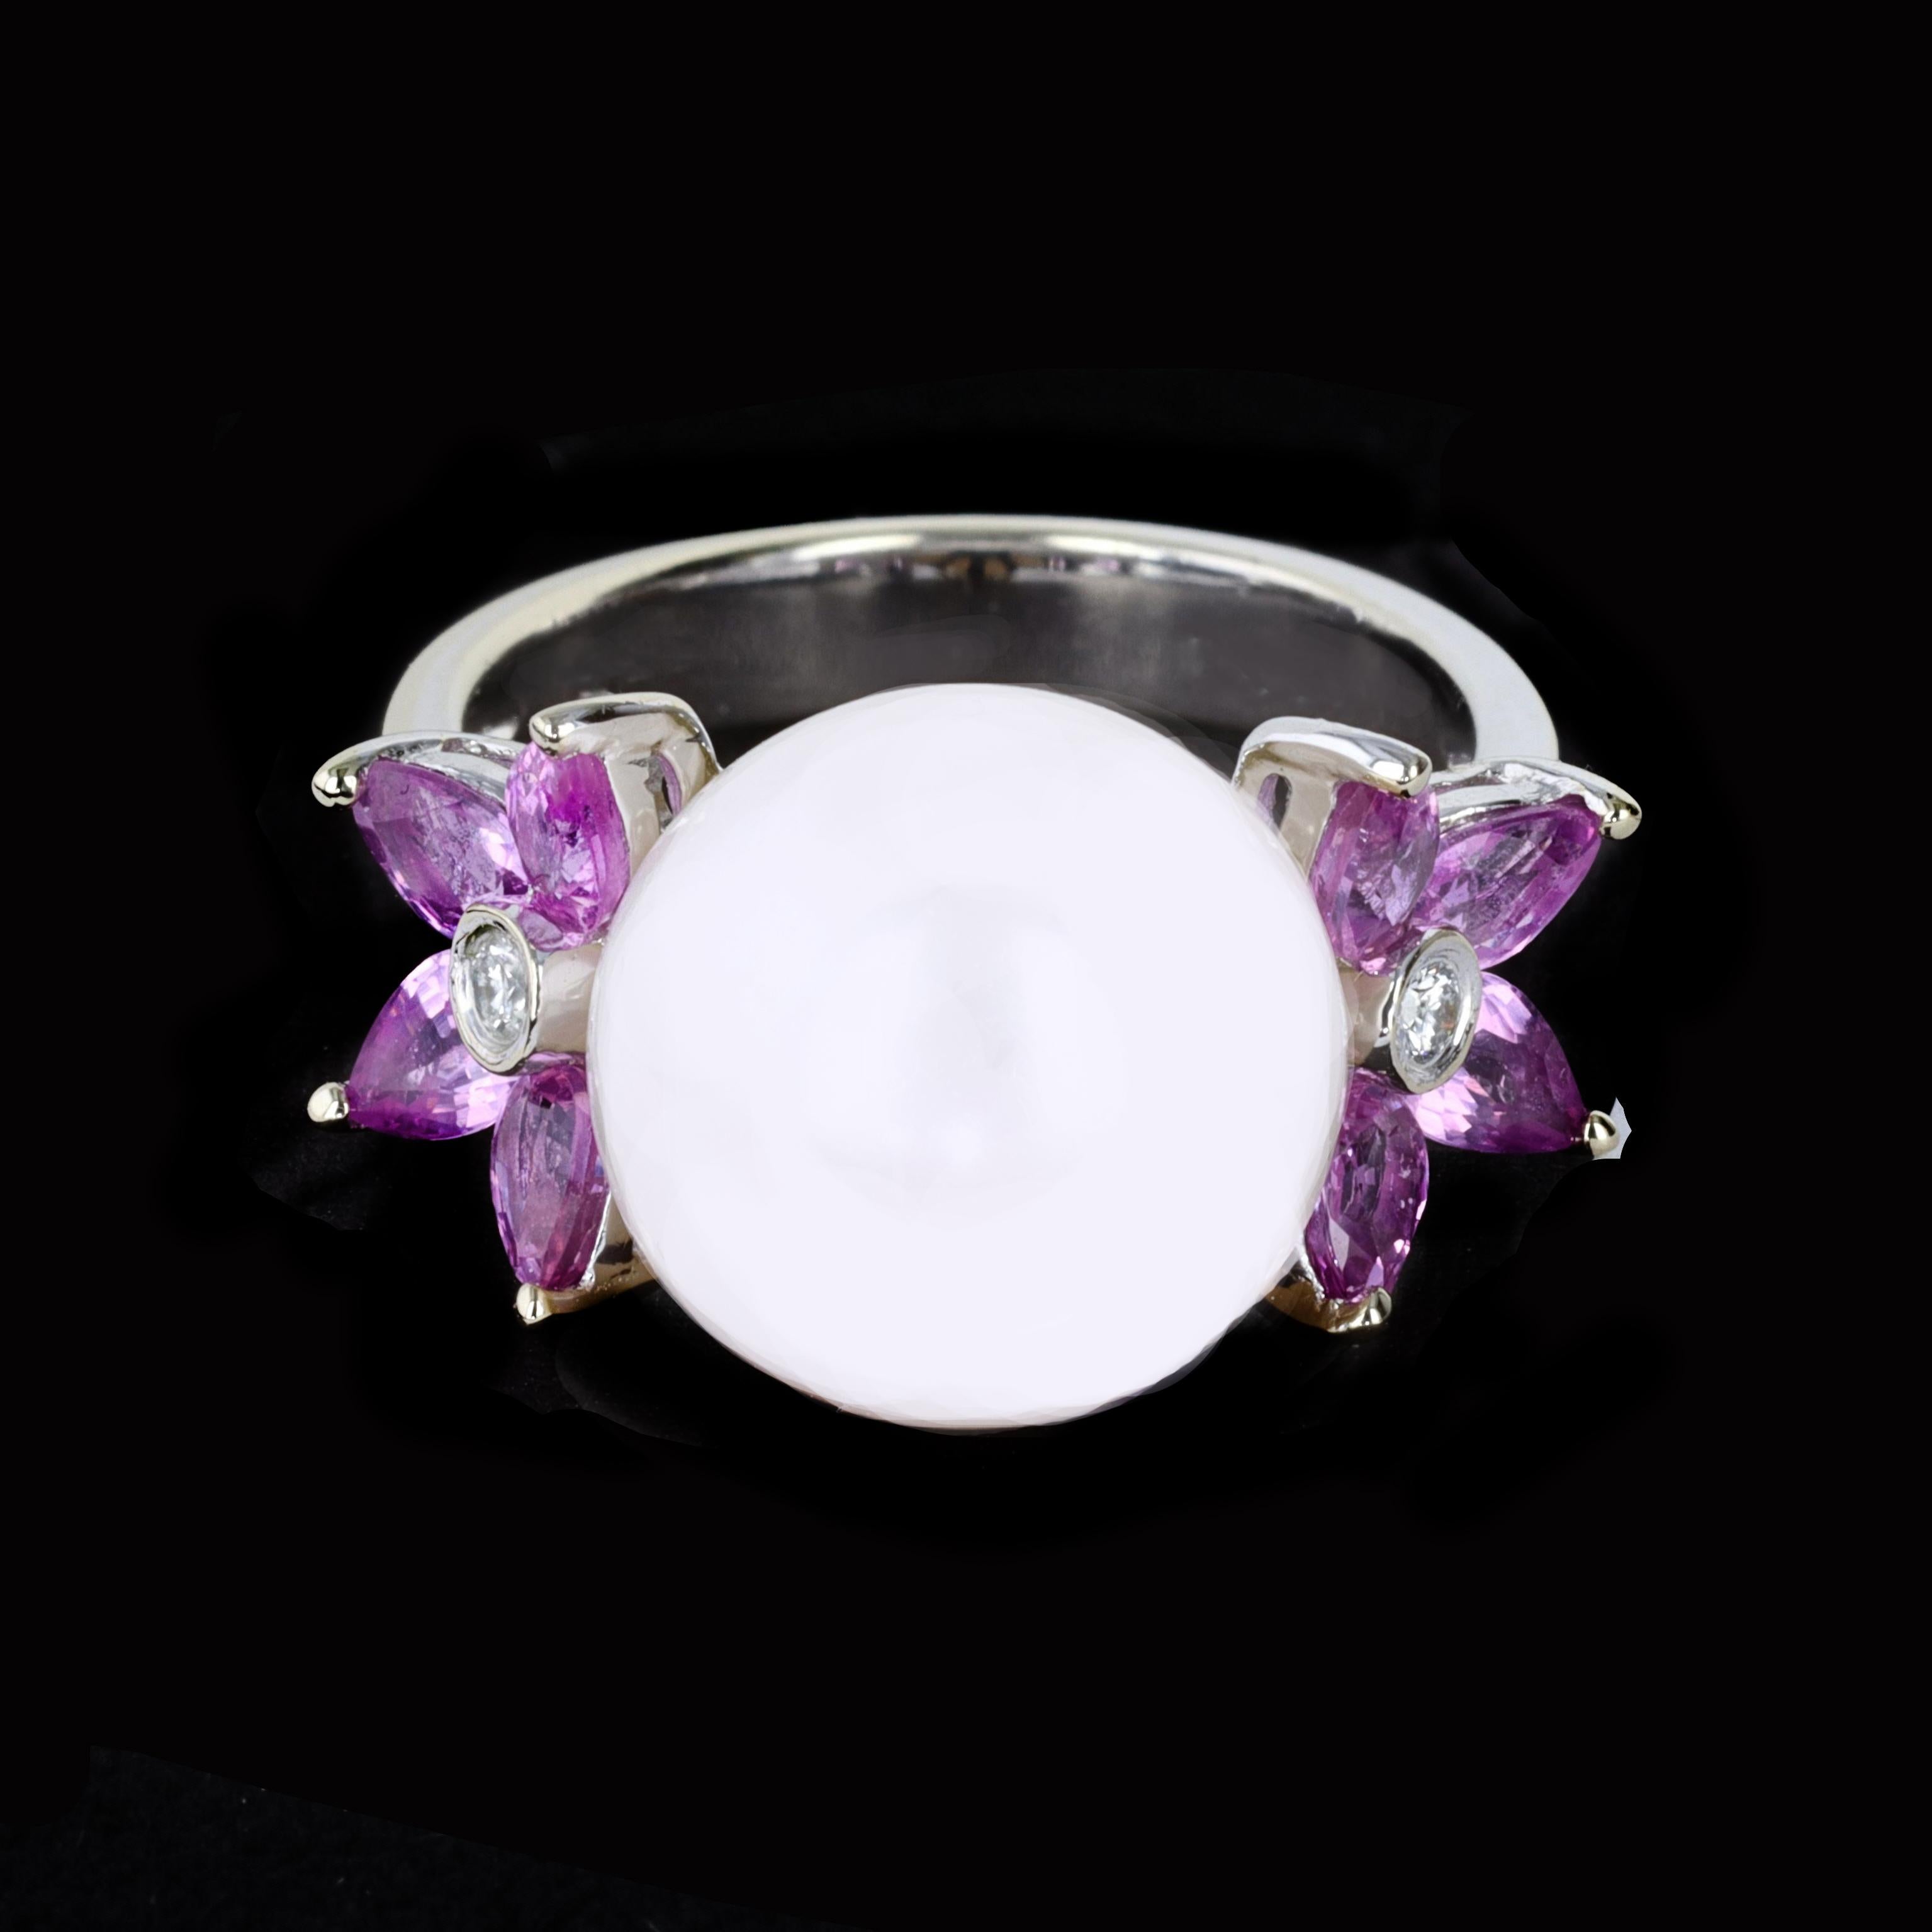 Radiate romance with the perfect combination of vibrant marquise cut pink sapphires and a satiny white pearl in this 18K white gold ring. The ring is centered with one lovely white pearl framed by marquise cut pink sapphires that weigh approximately